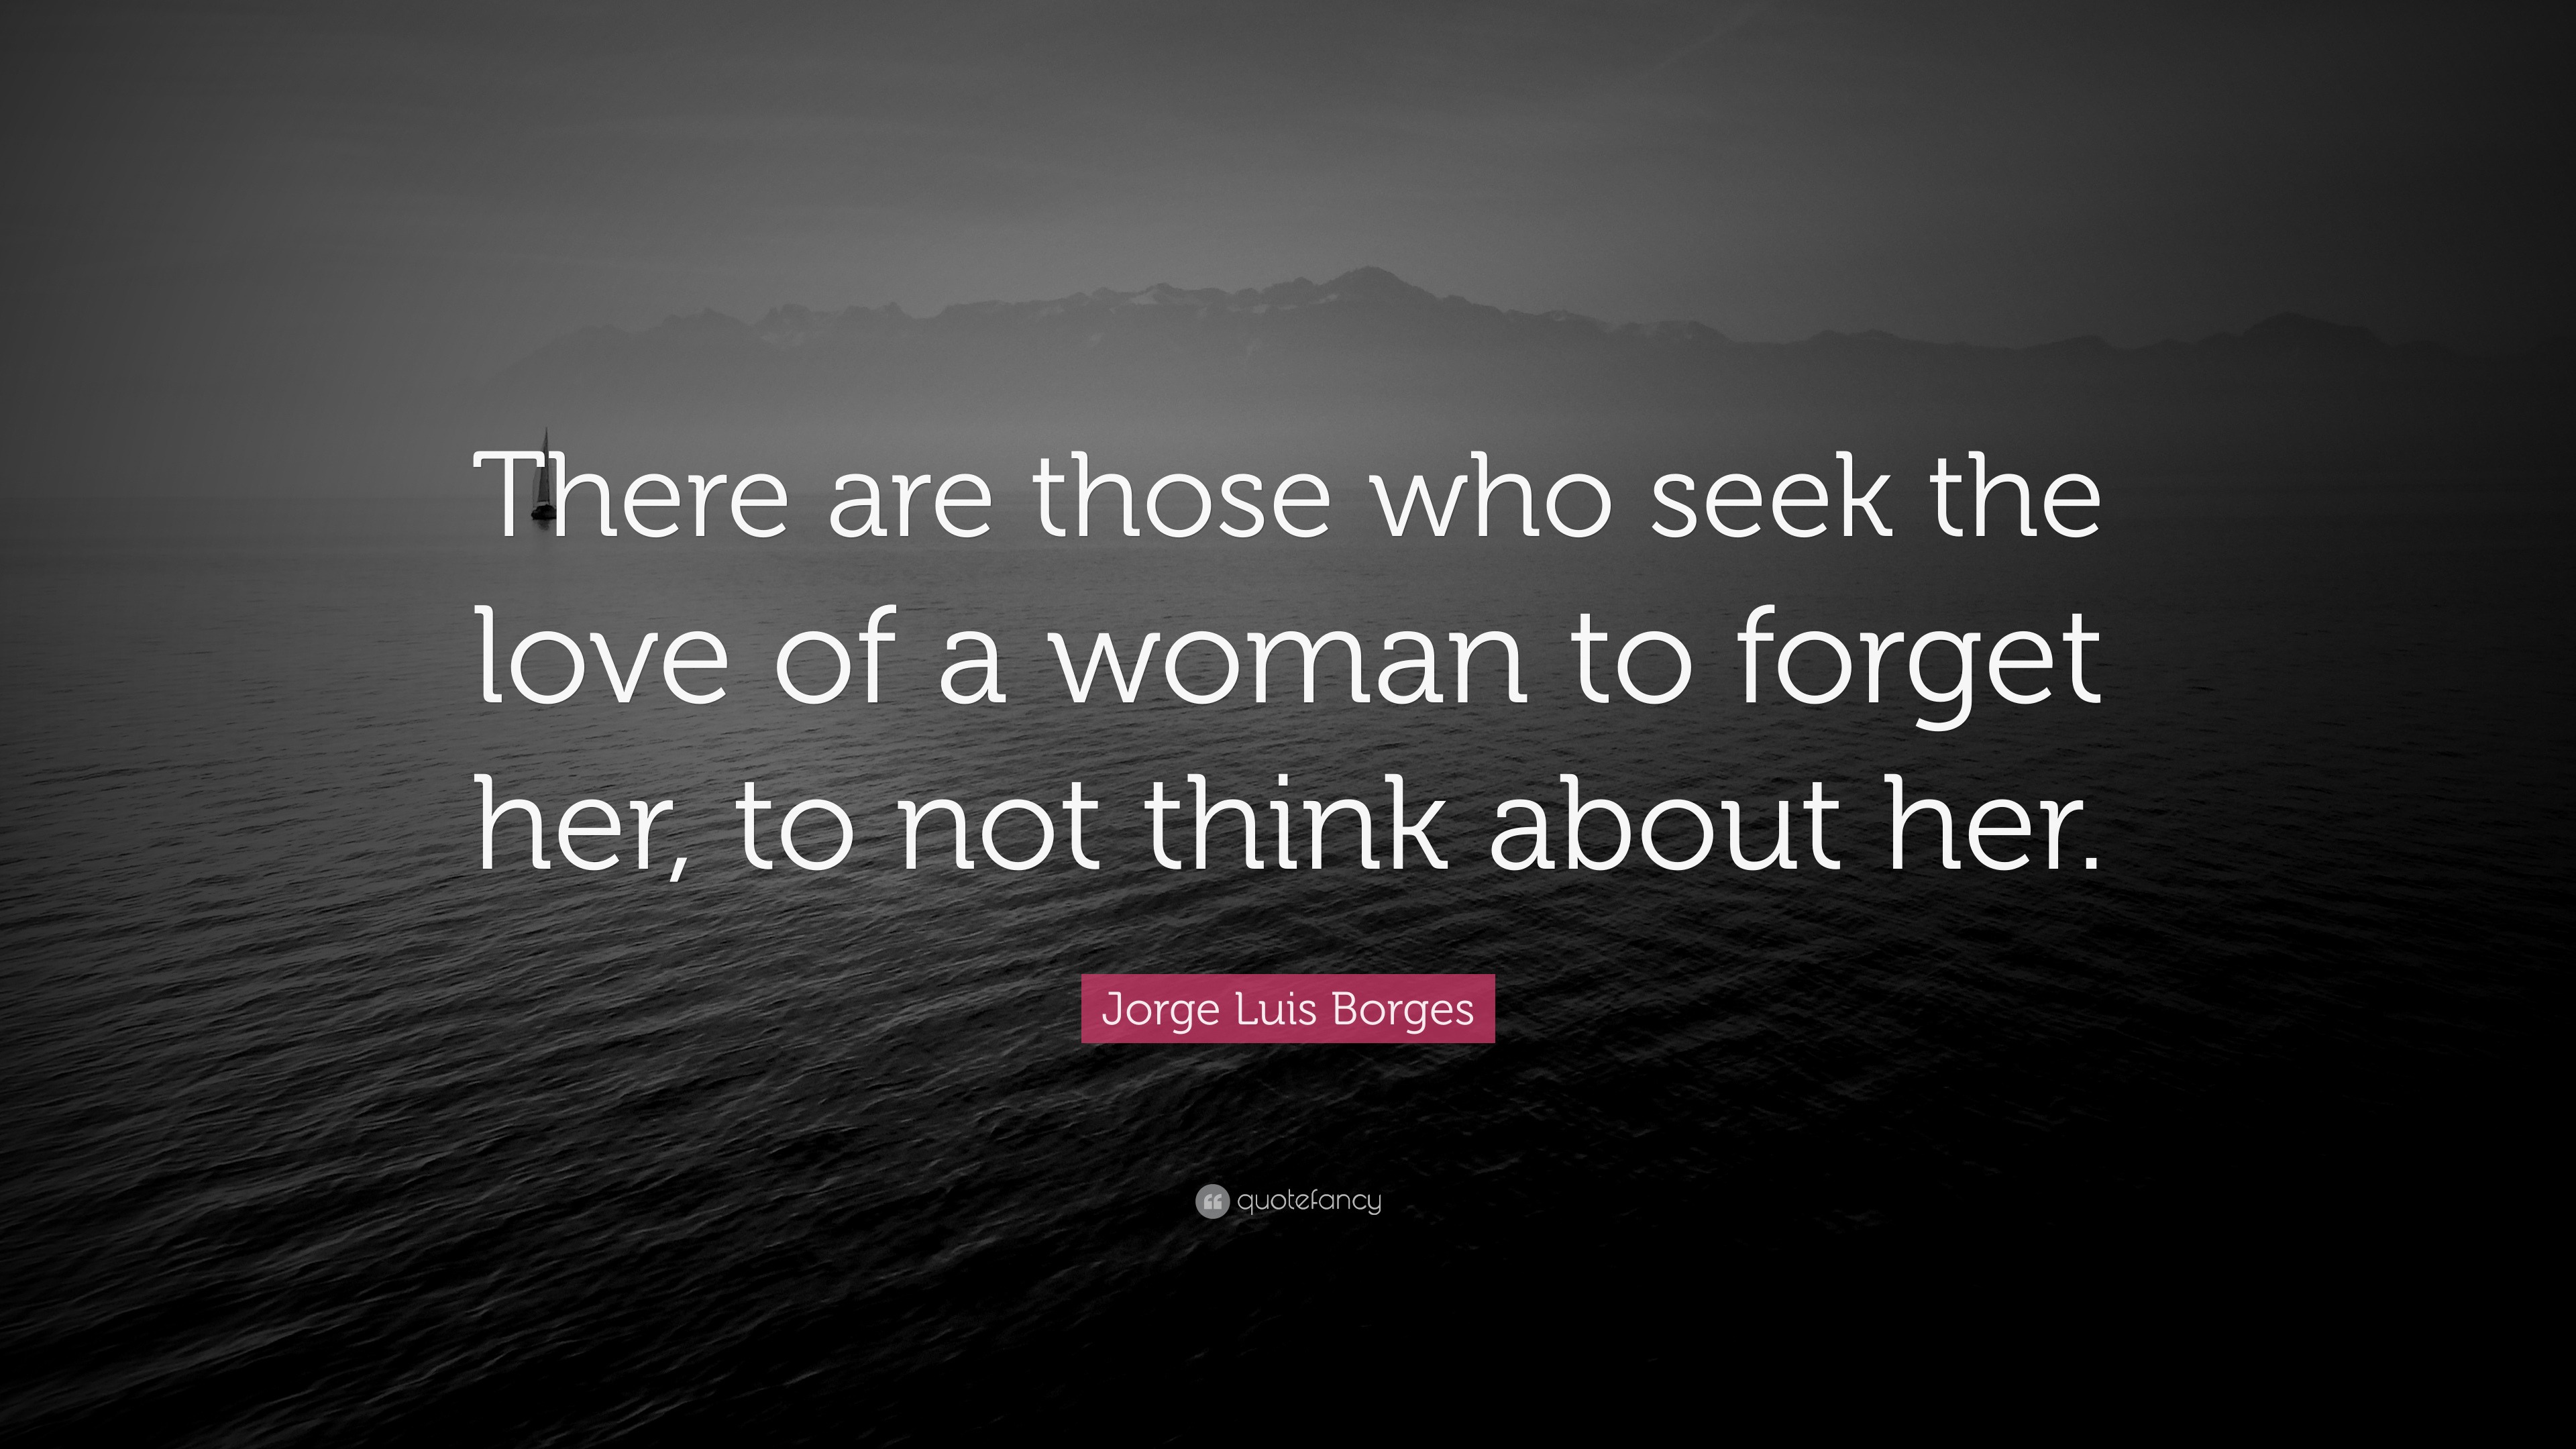 Jorge Luis Borges Quote: “There are those who seek the love of a woman ...